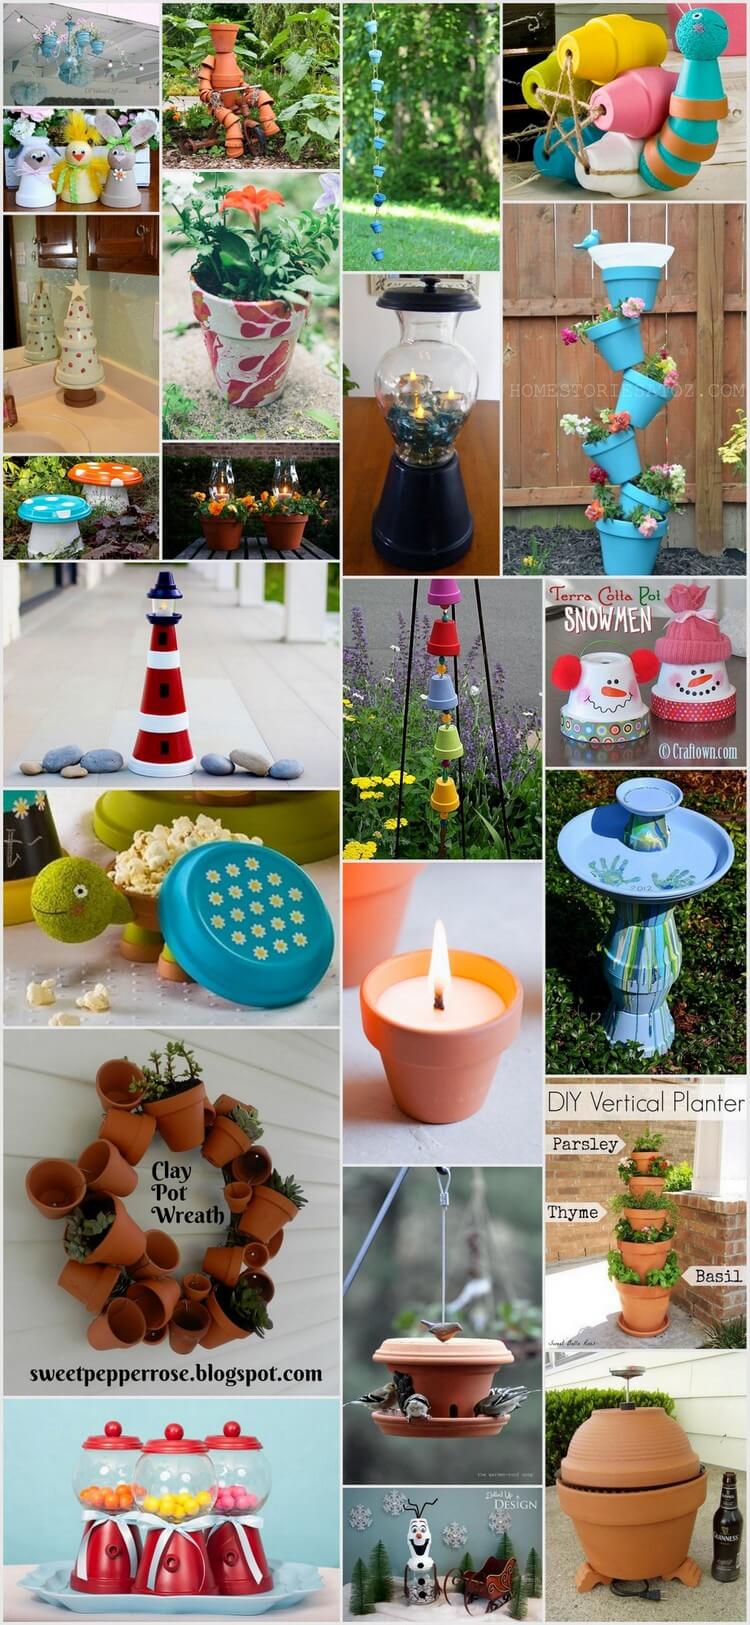 20+ Fascinating Things To Make With Clay Pots